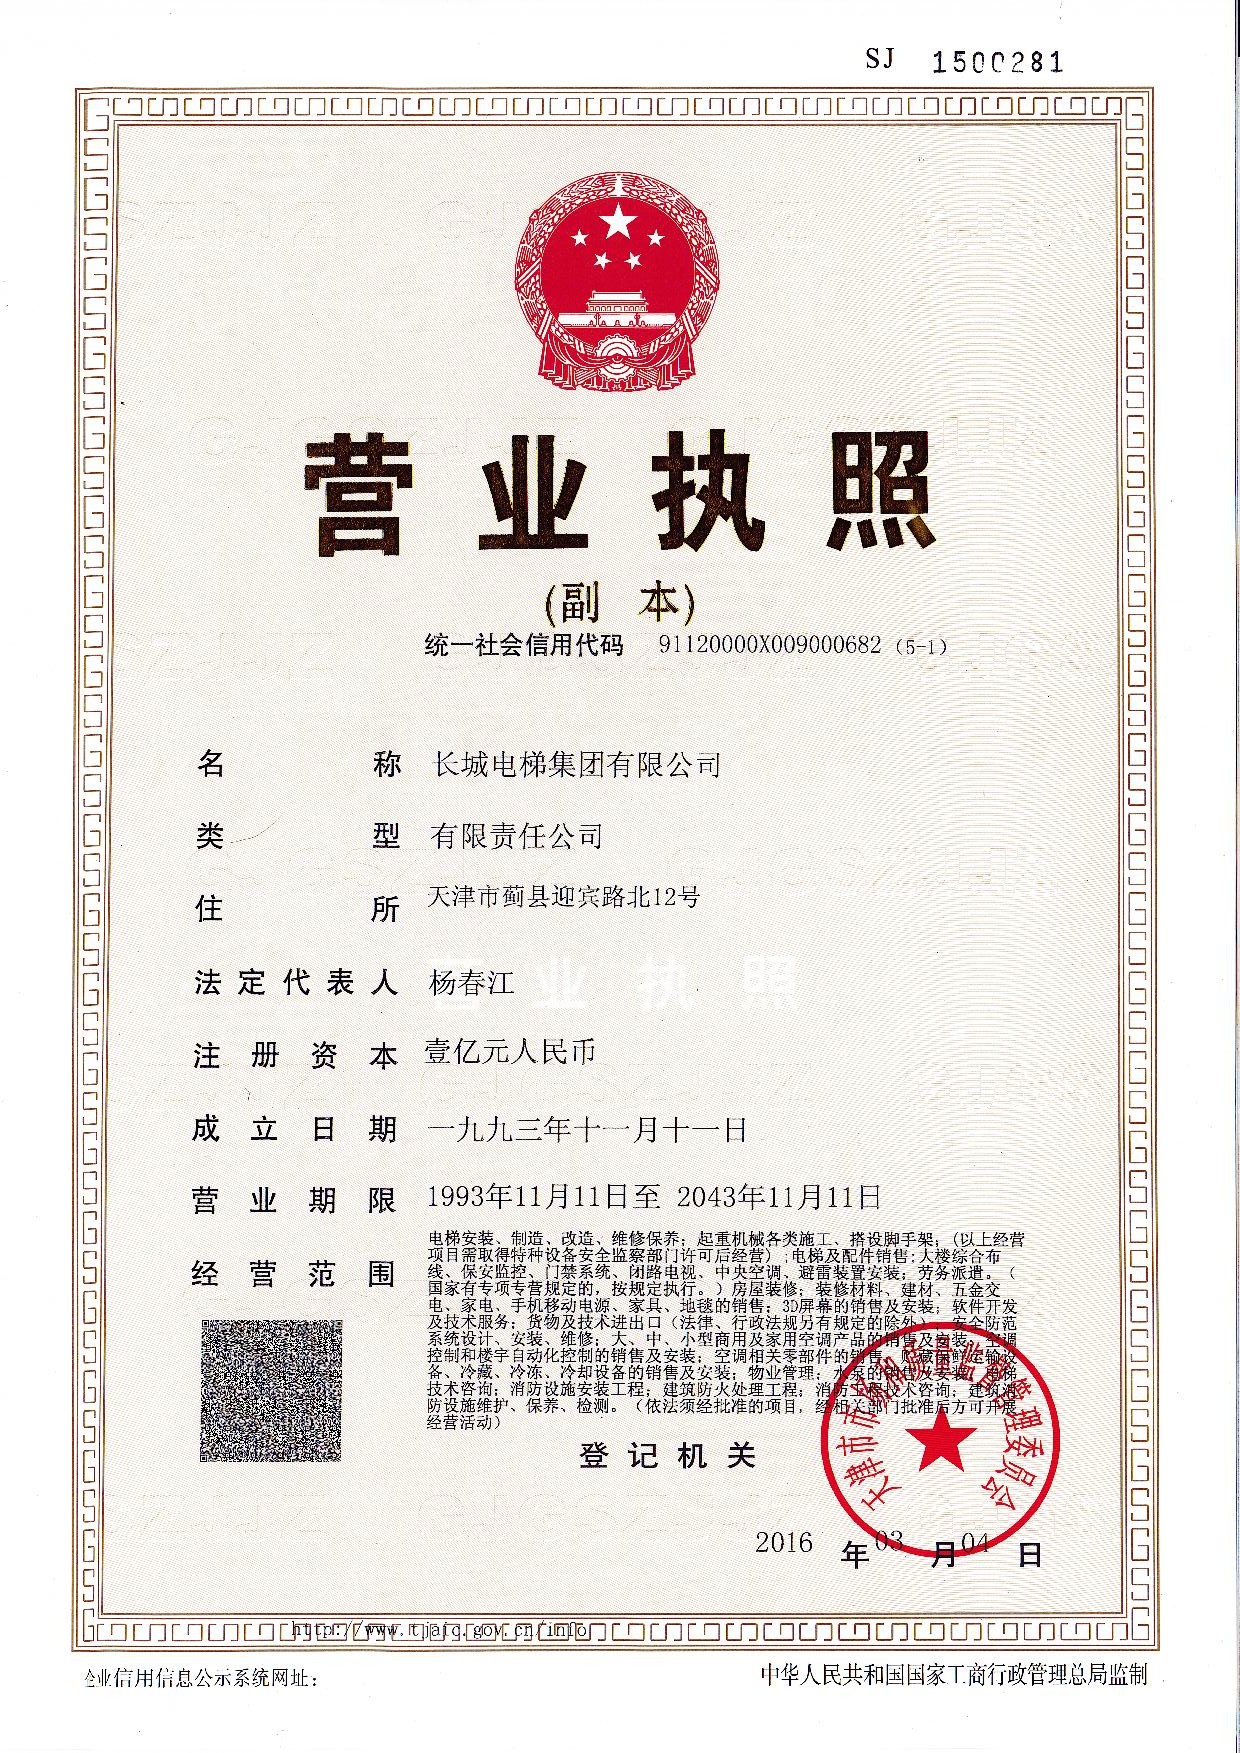 Copy of the business license